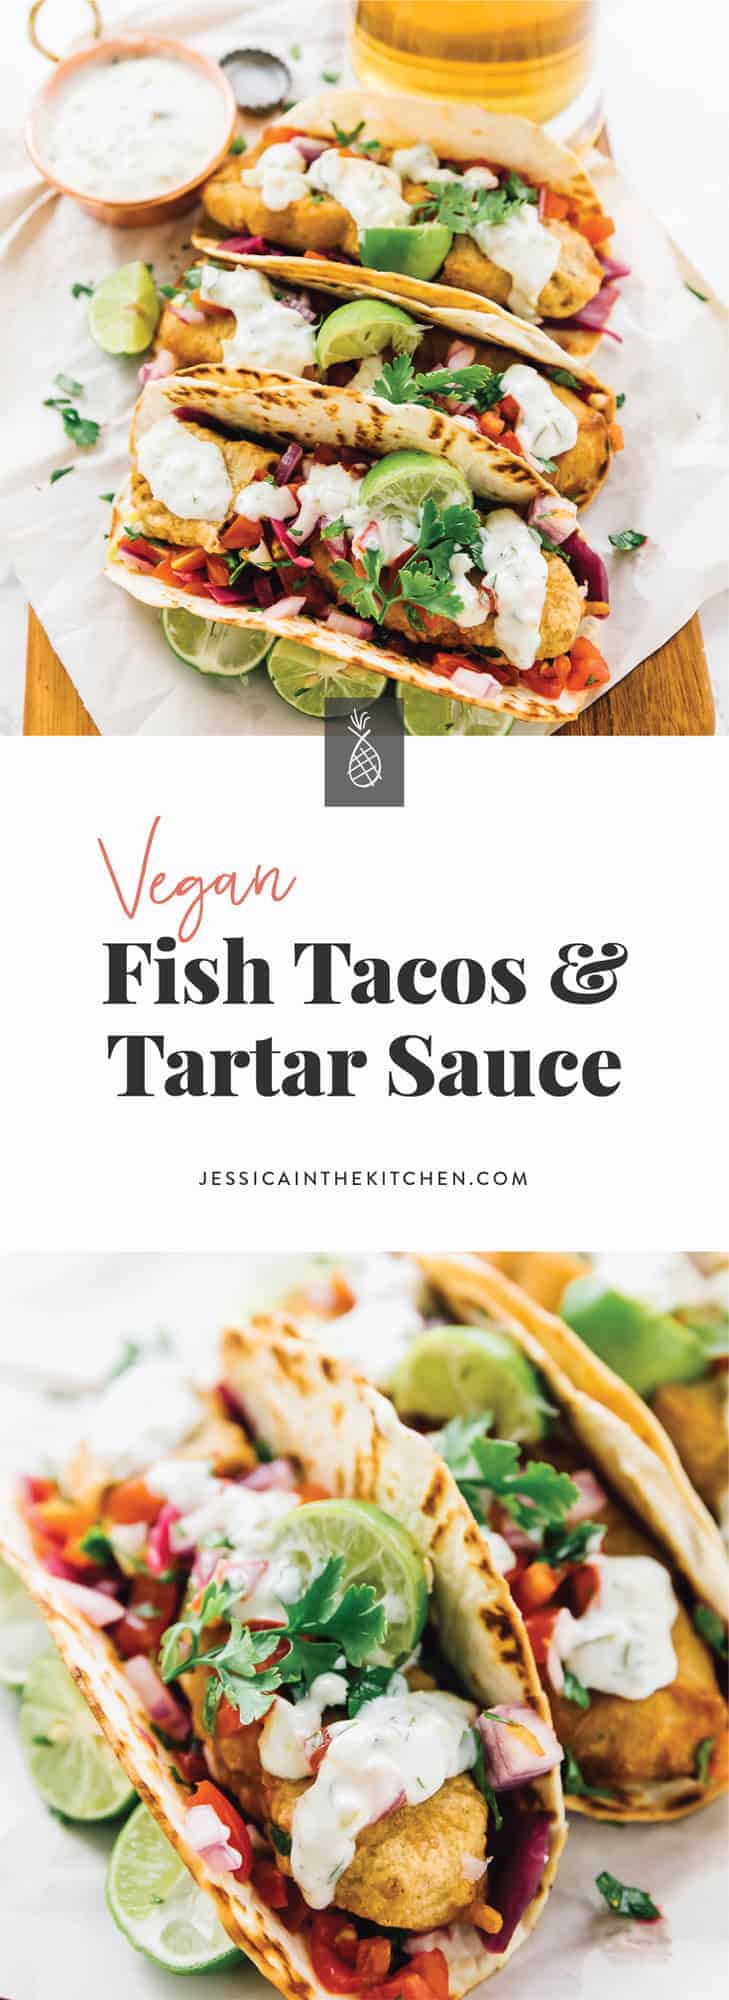 This Vegan Fish Tacos are a real vegan treat!! A beer-battered crust, flavourful pico de gallo and a creamy tartar sauce make for the ultimate vegan taco experience! via https://jessicainthekitchen.com